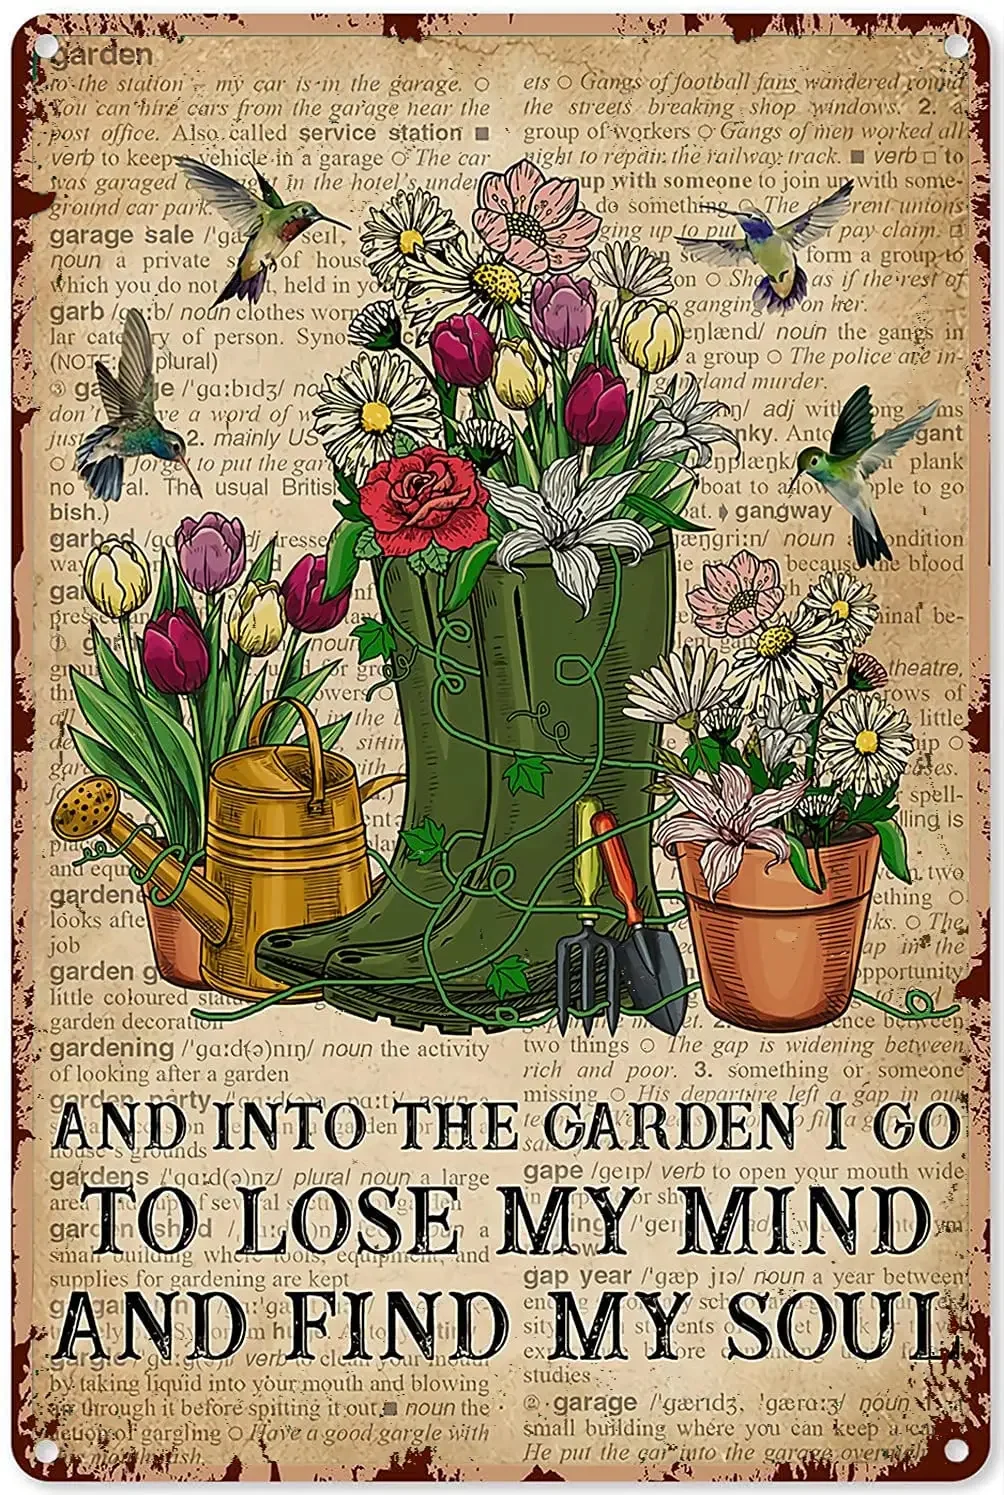 

Garden Tin Signs Vintage and Into The I Go To Lose My Mind Find Soul Sign Decoration Chic Metal Poster Wall Decor Art Gift